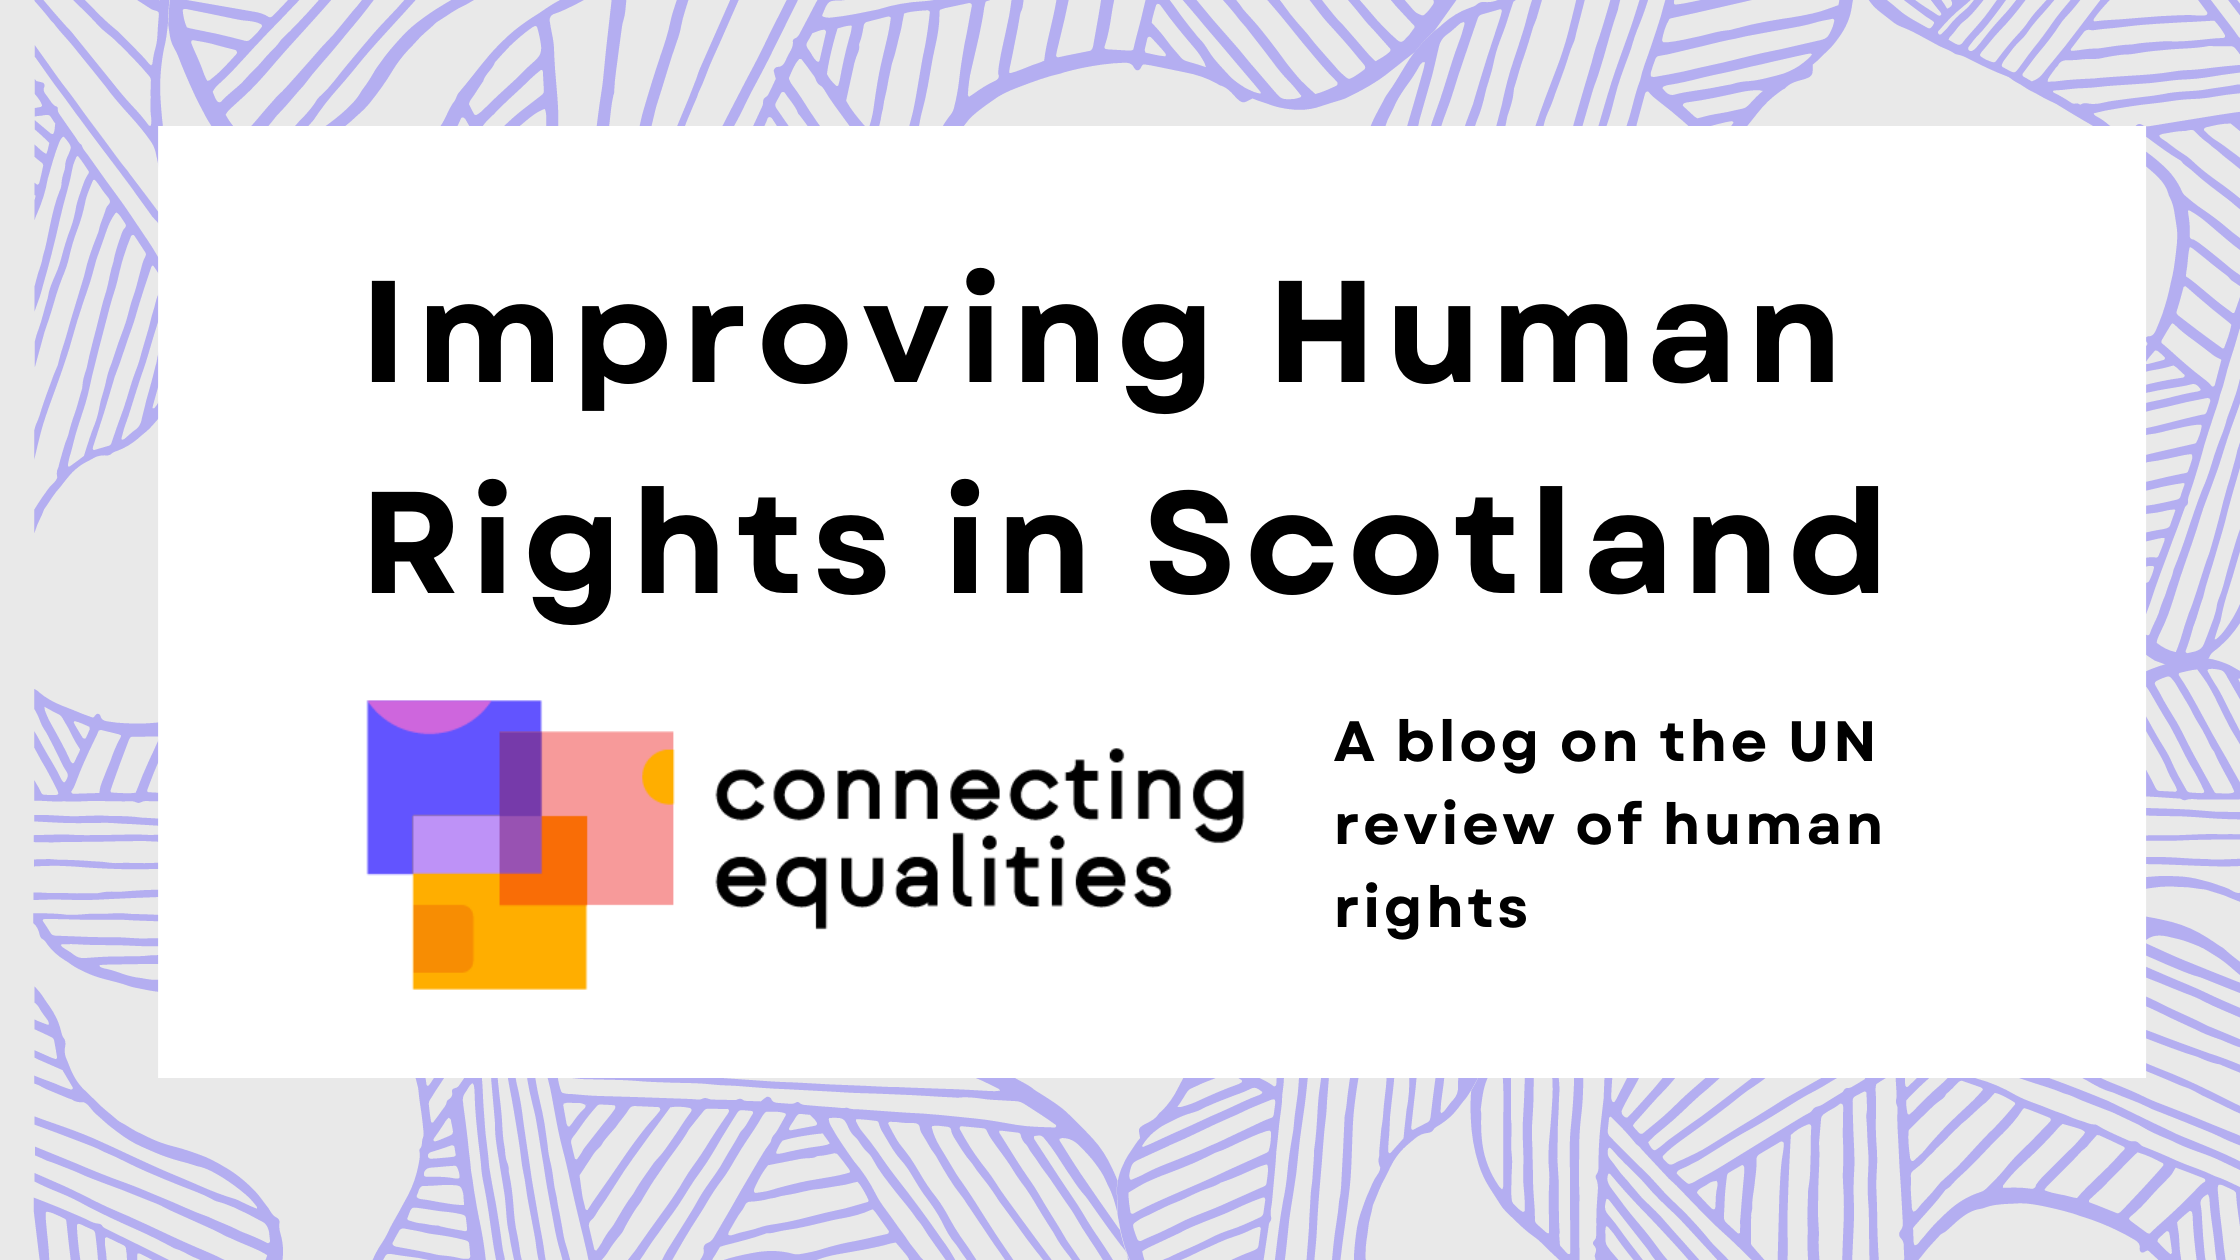 Improving Human Rights in Scotland, a blog on the UN review of human rights